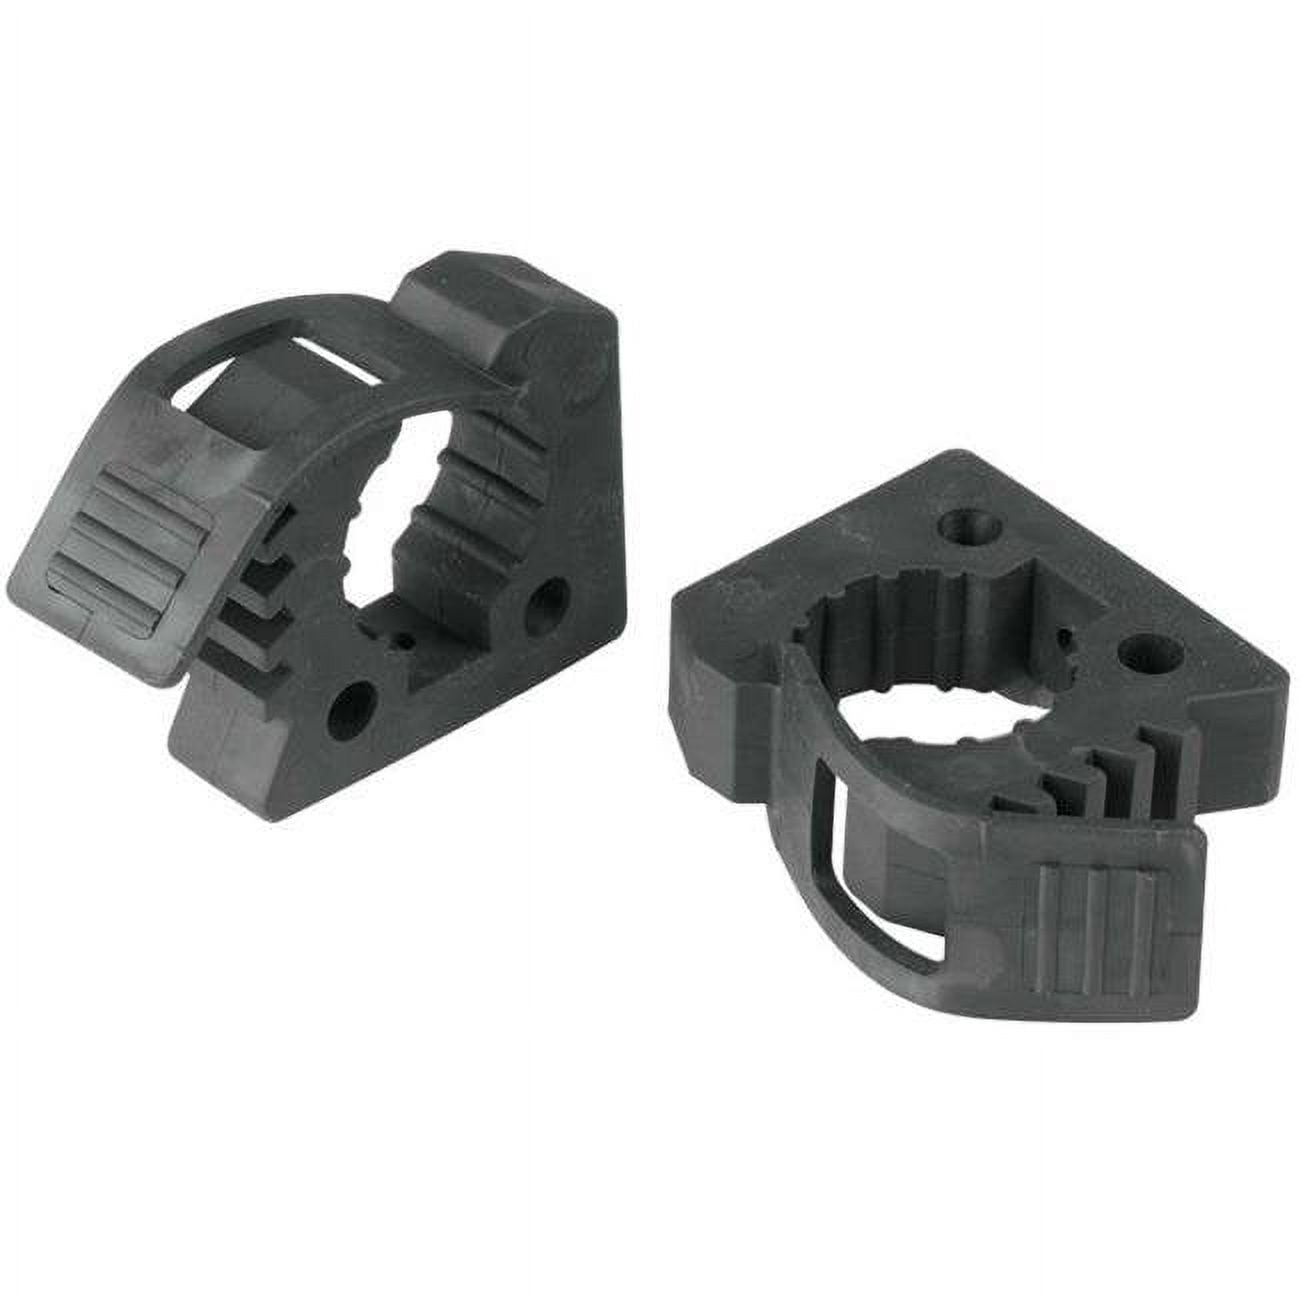 Quick Fist Rubber Clamps For Off-road Vehicles - 2 Pack (small)